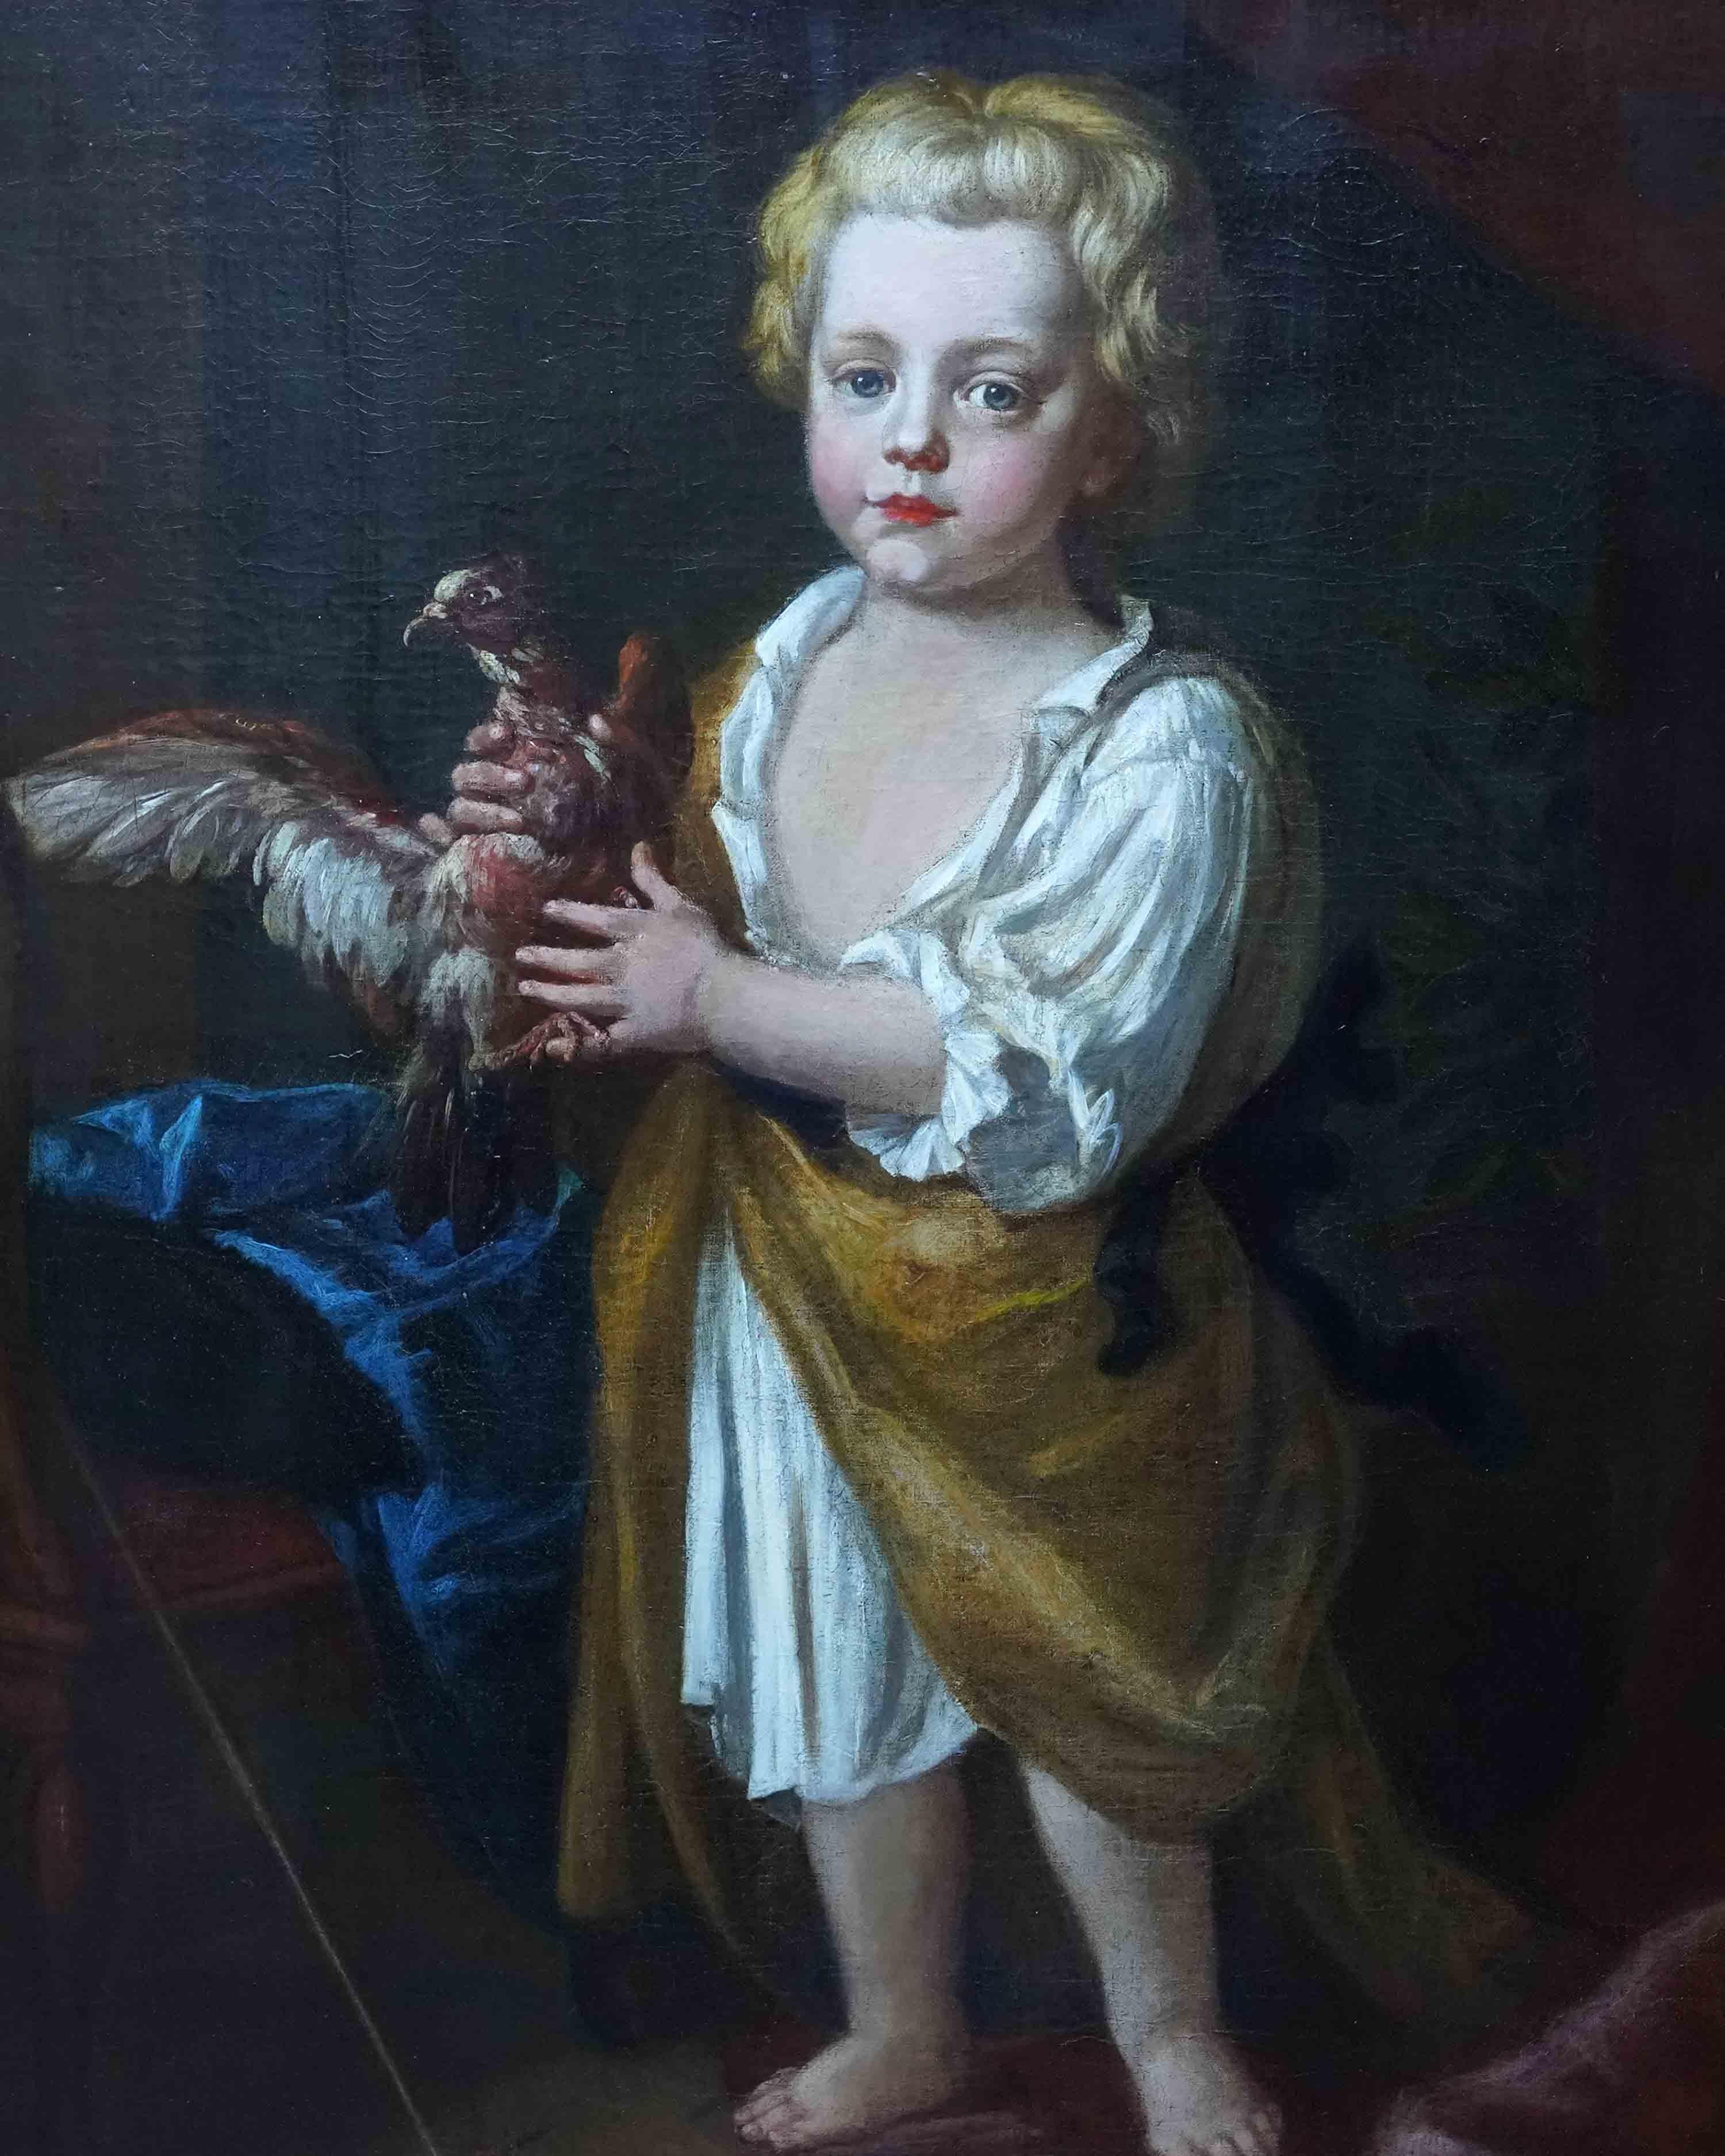 Portrait of a Boy with Bird - British 17th century art Old Master oil painting For Sale 7